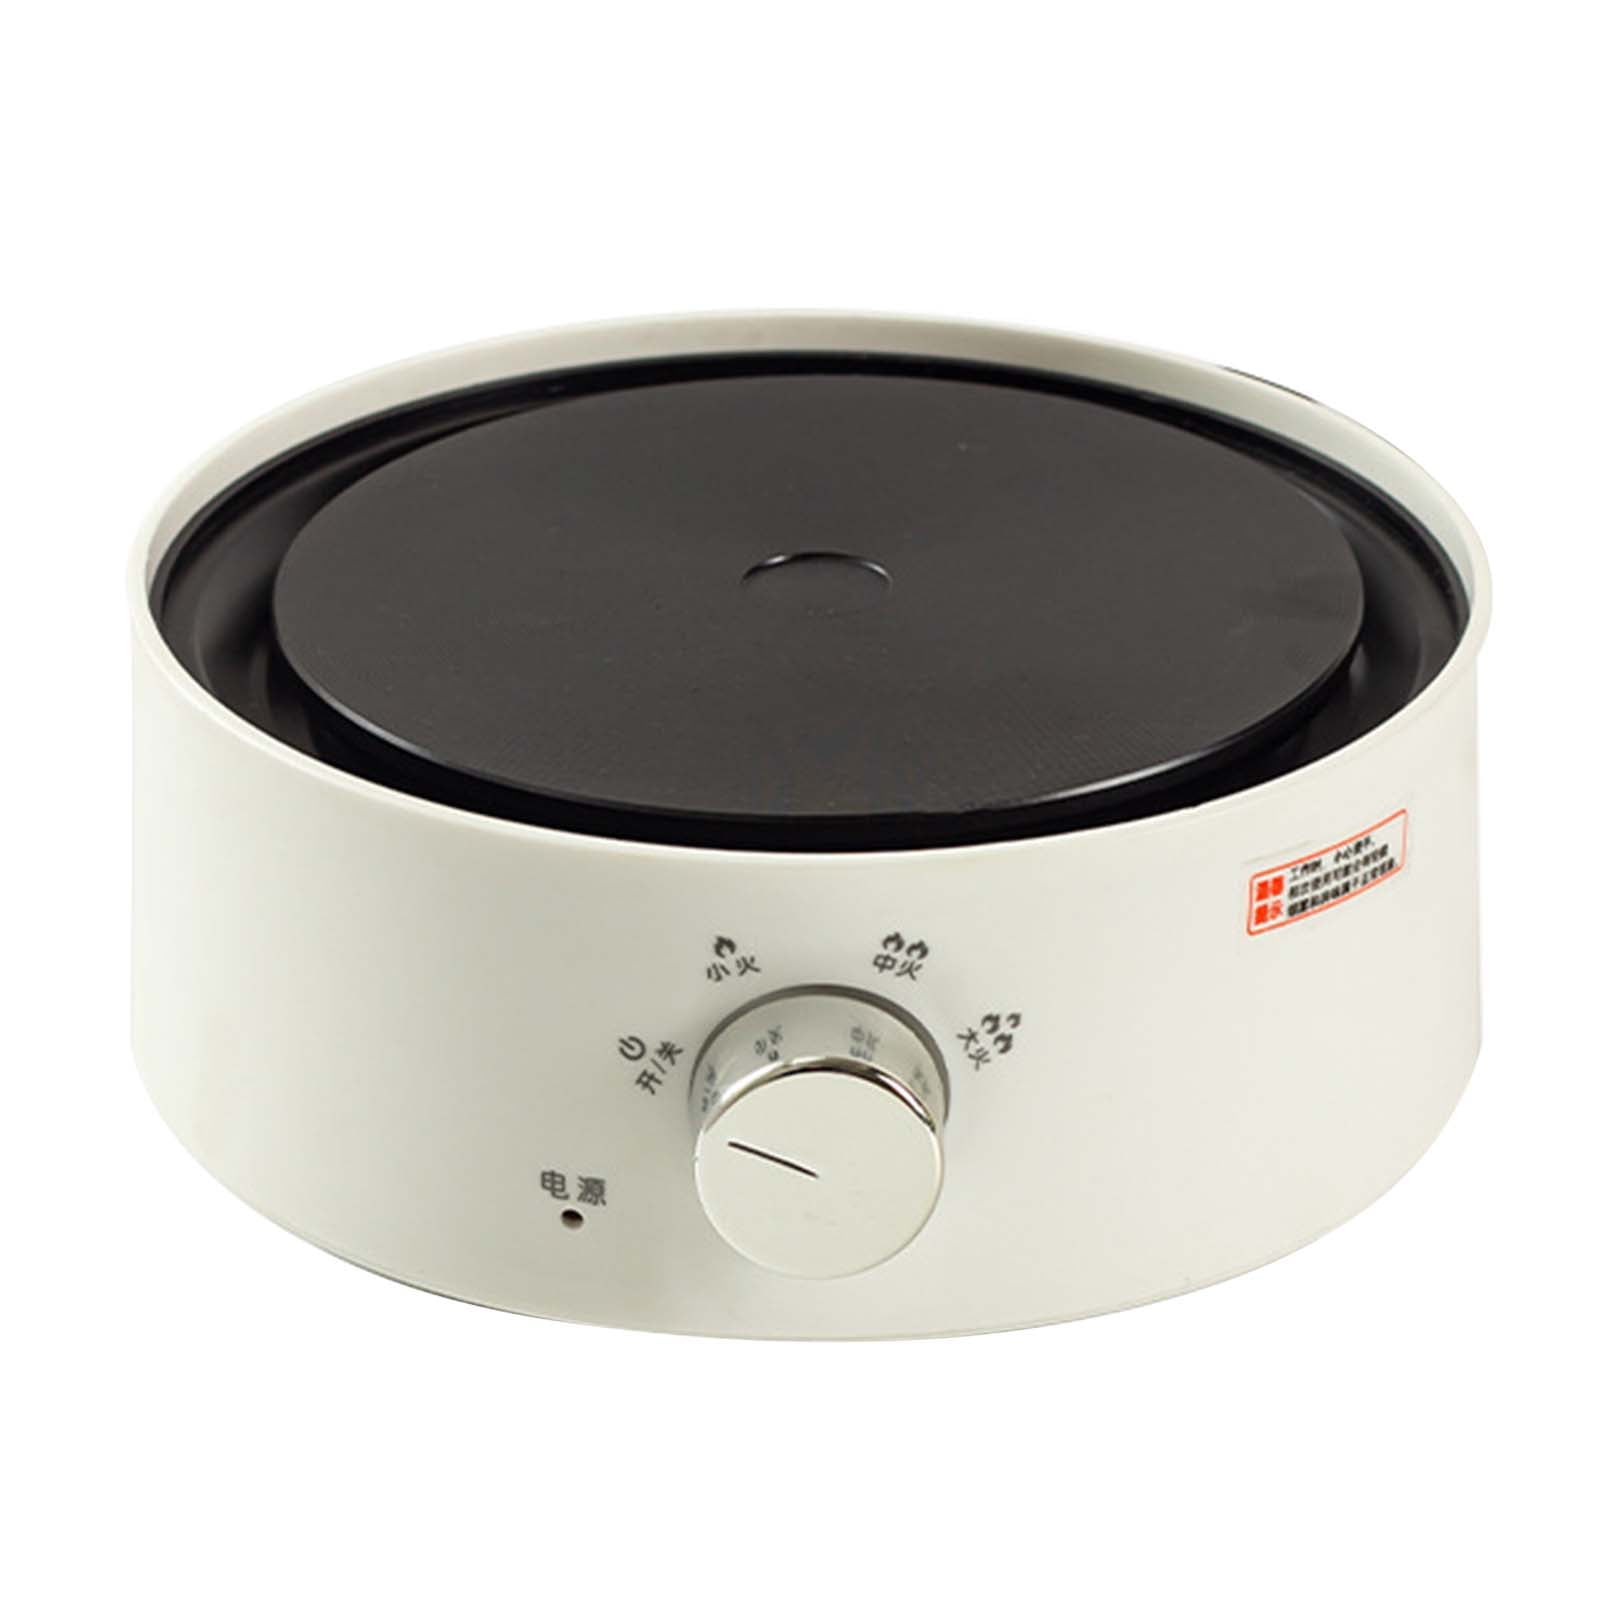 Portable Electric Mini Stove Hot Pot Heating Plate Cooking Coffee